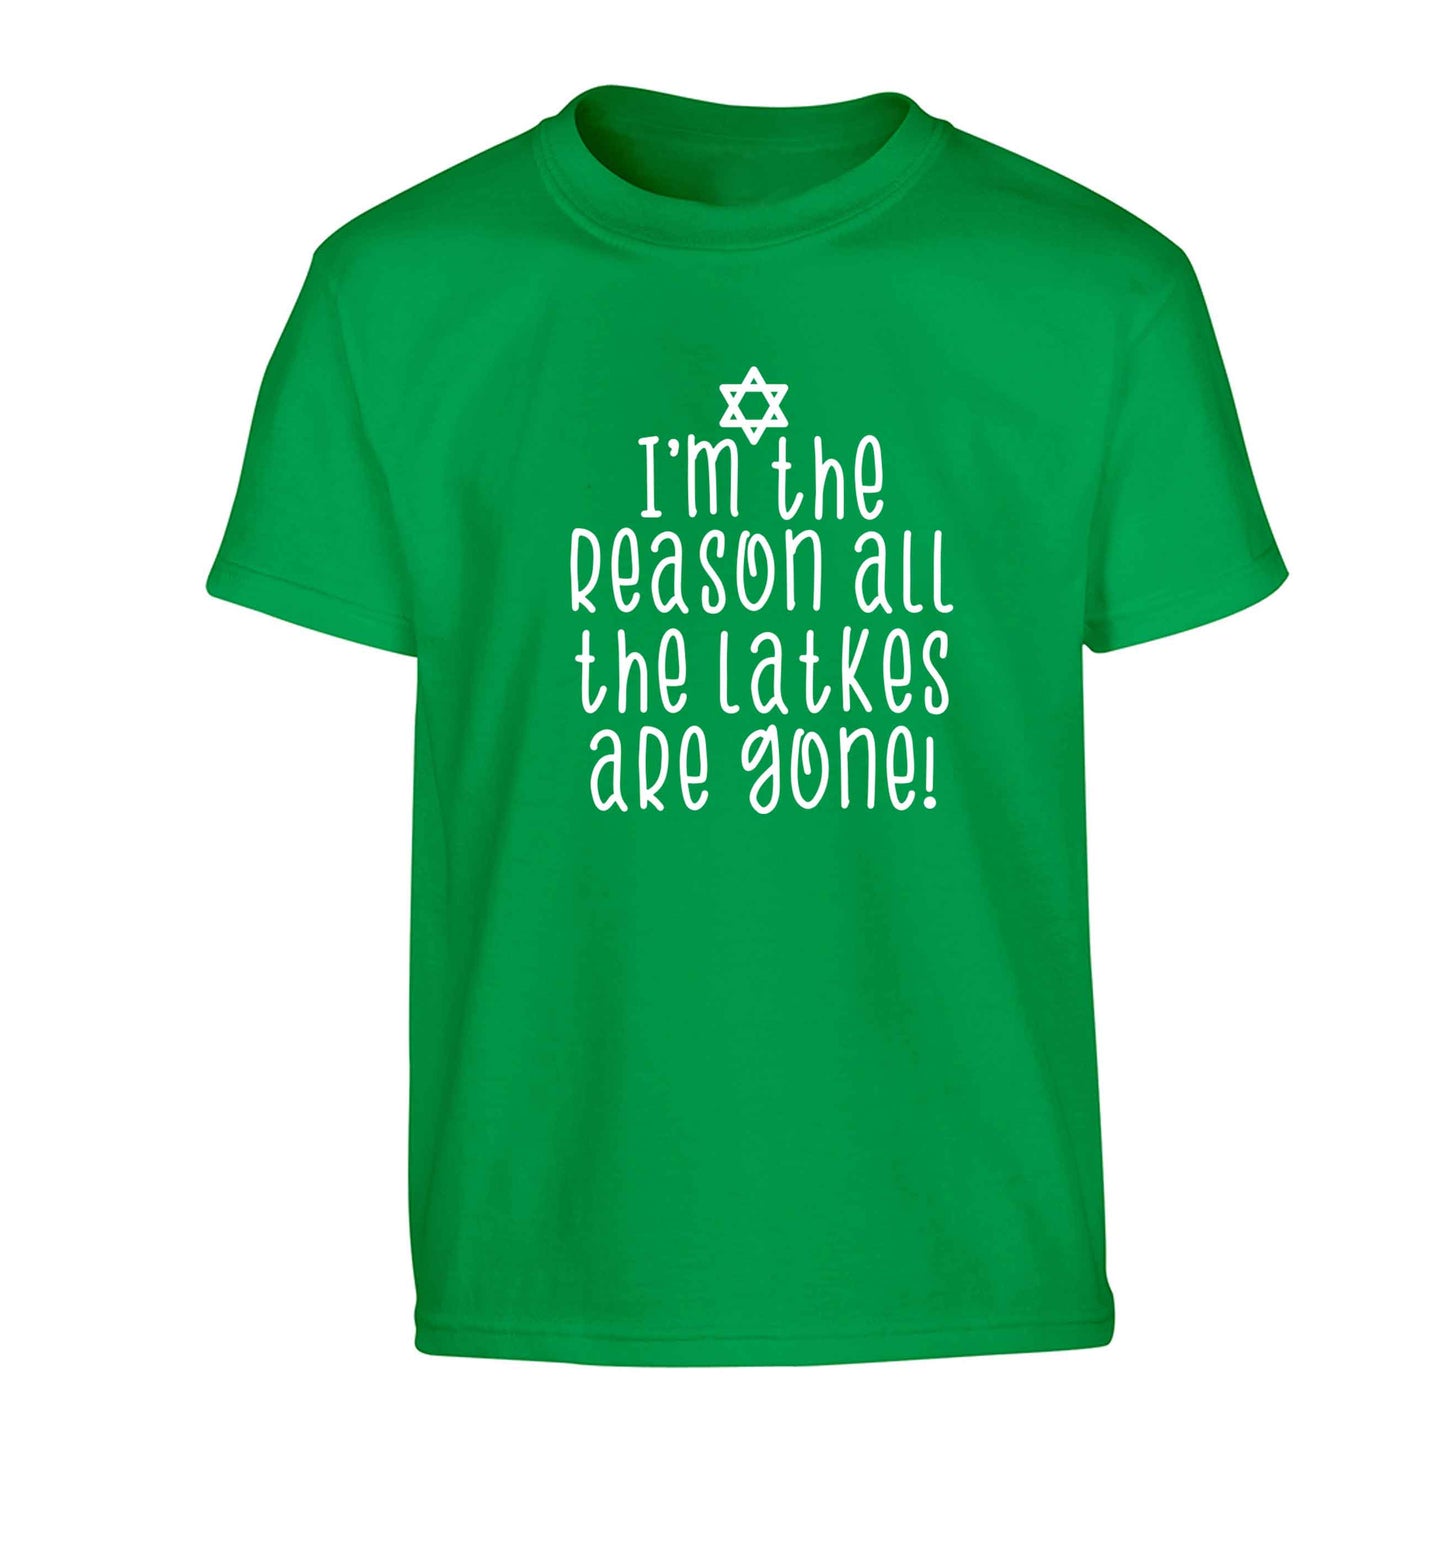 I'm the reason all the latkes are gone Children's green Tshirt 12-13 Years